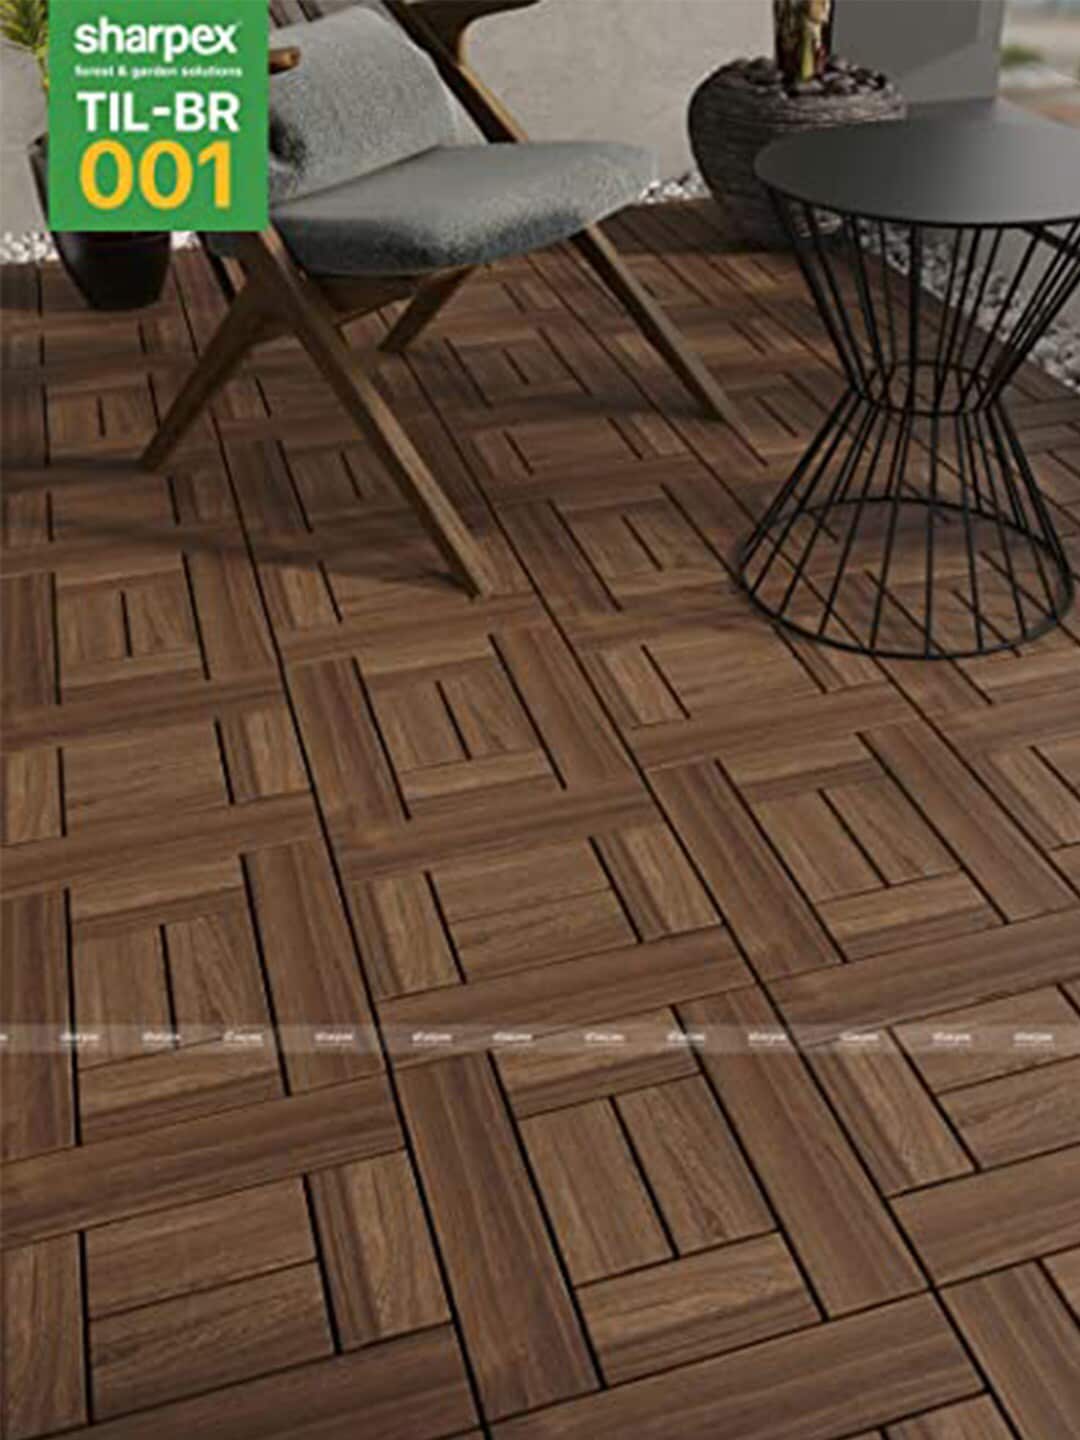 Sharpex Brown Solid Deck Wood Tiles Price in India